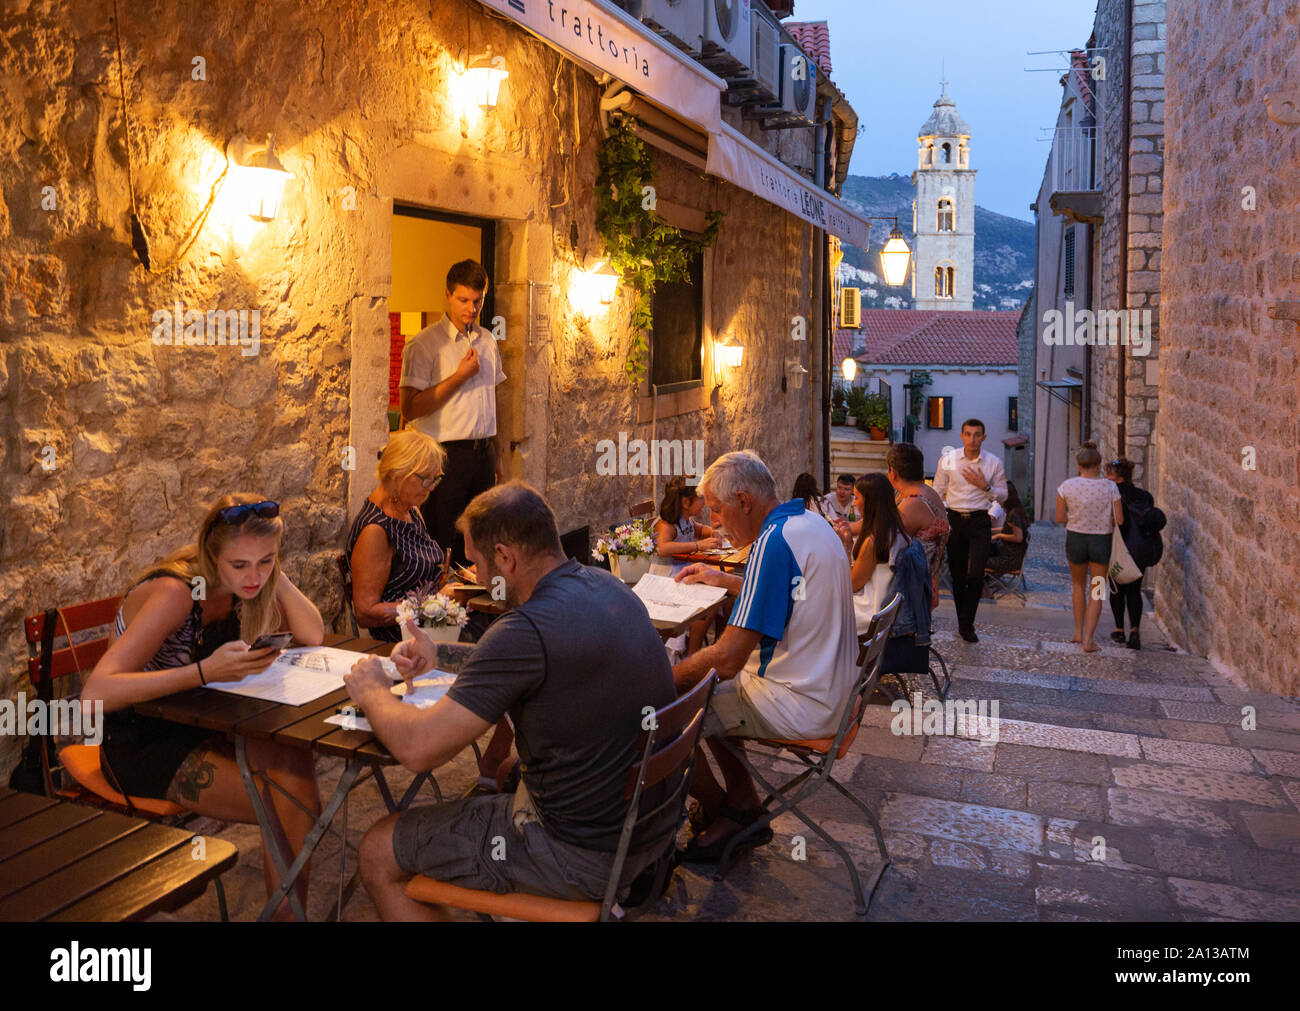 Dubrovnik holiday - tourists and locals eating at a restaurant outdoors in the evening, Dubrovnik old town, Dubrovnik Croatia Europe Stock Photo